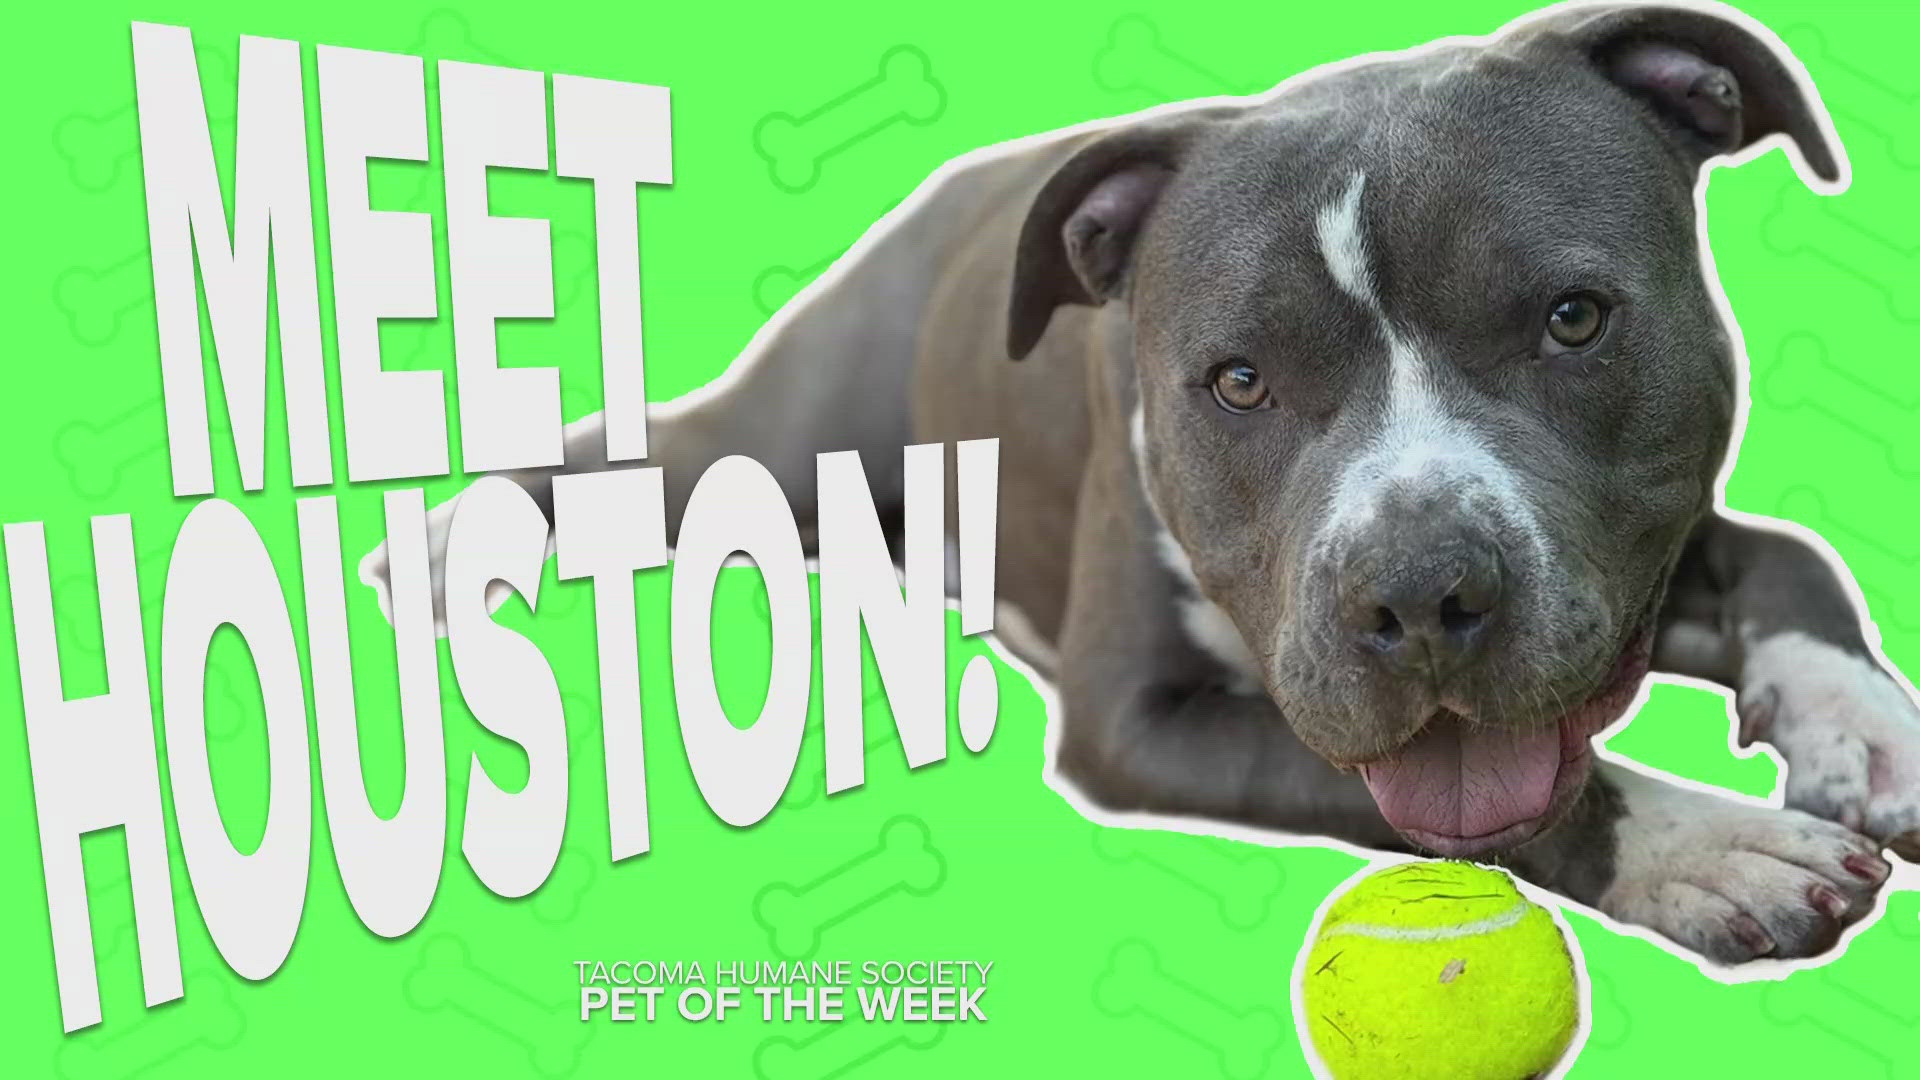 This week's featured adoptable rescue pet is Houston!